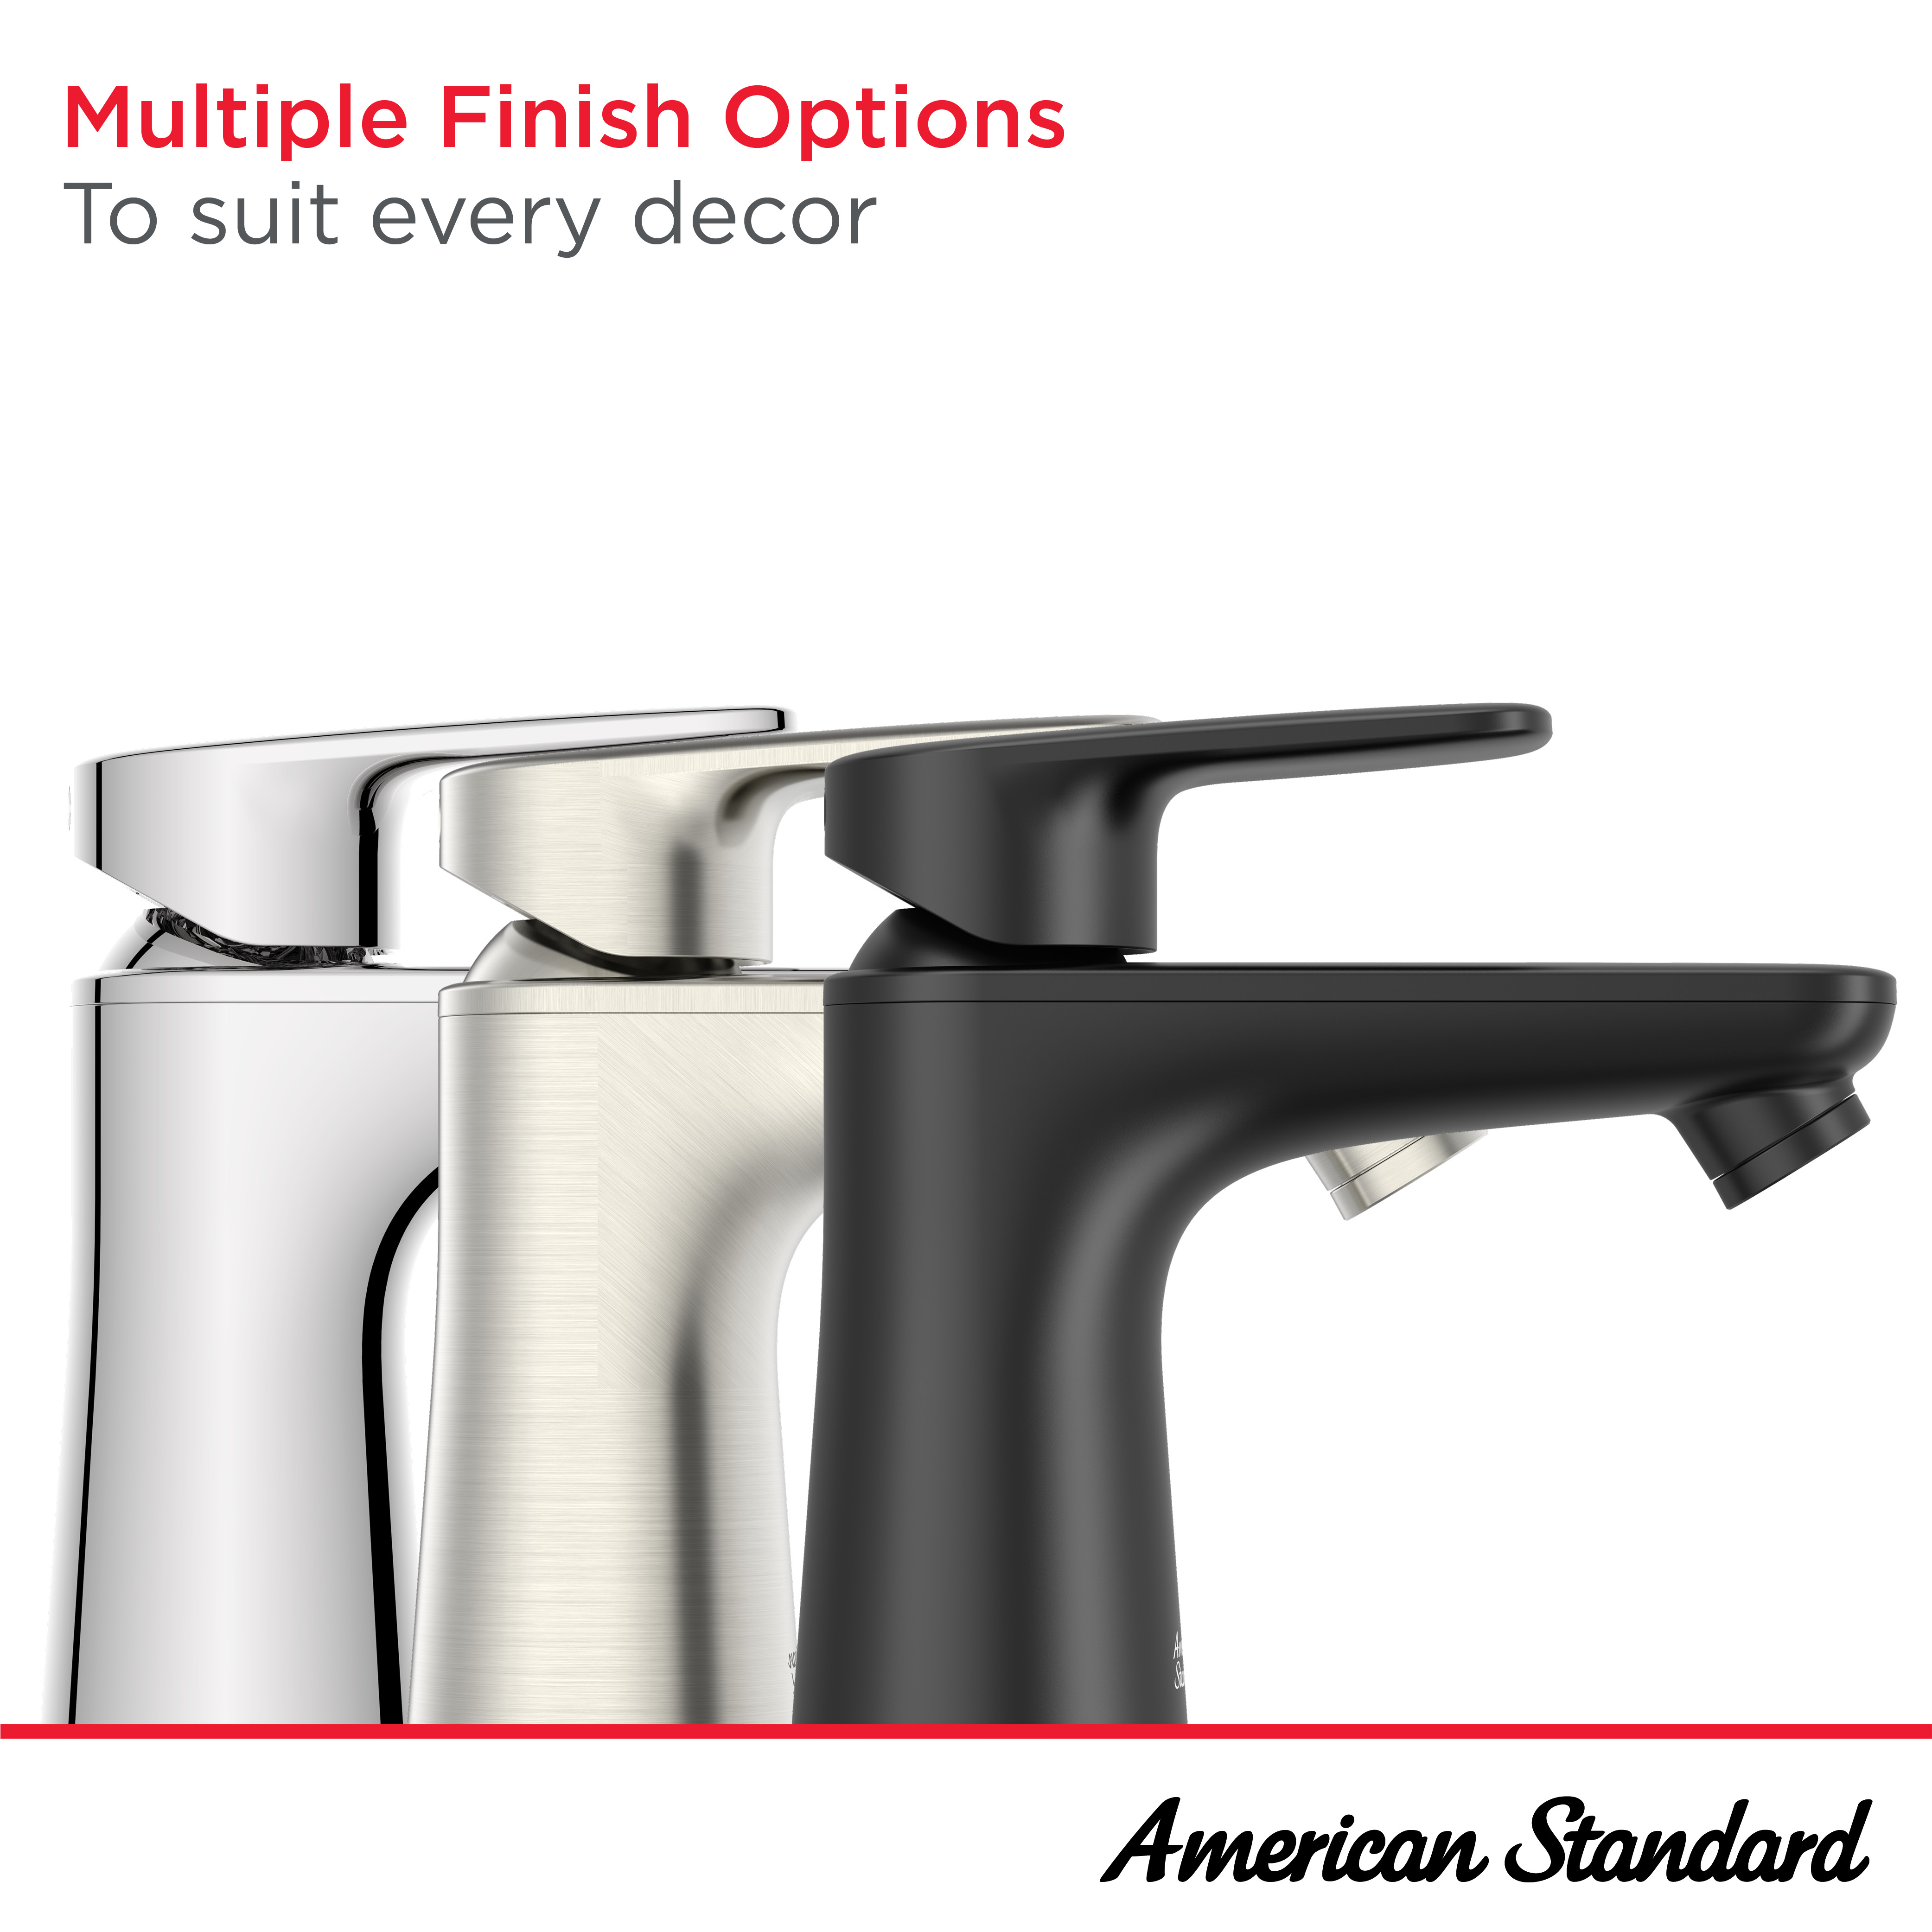 Aspirations™ Single-Handle Petite Bathroom Faucet 1.2 gpm/ 4.5 L/min With Lever Handle